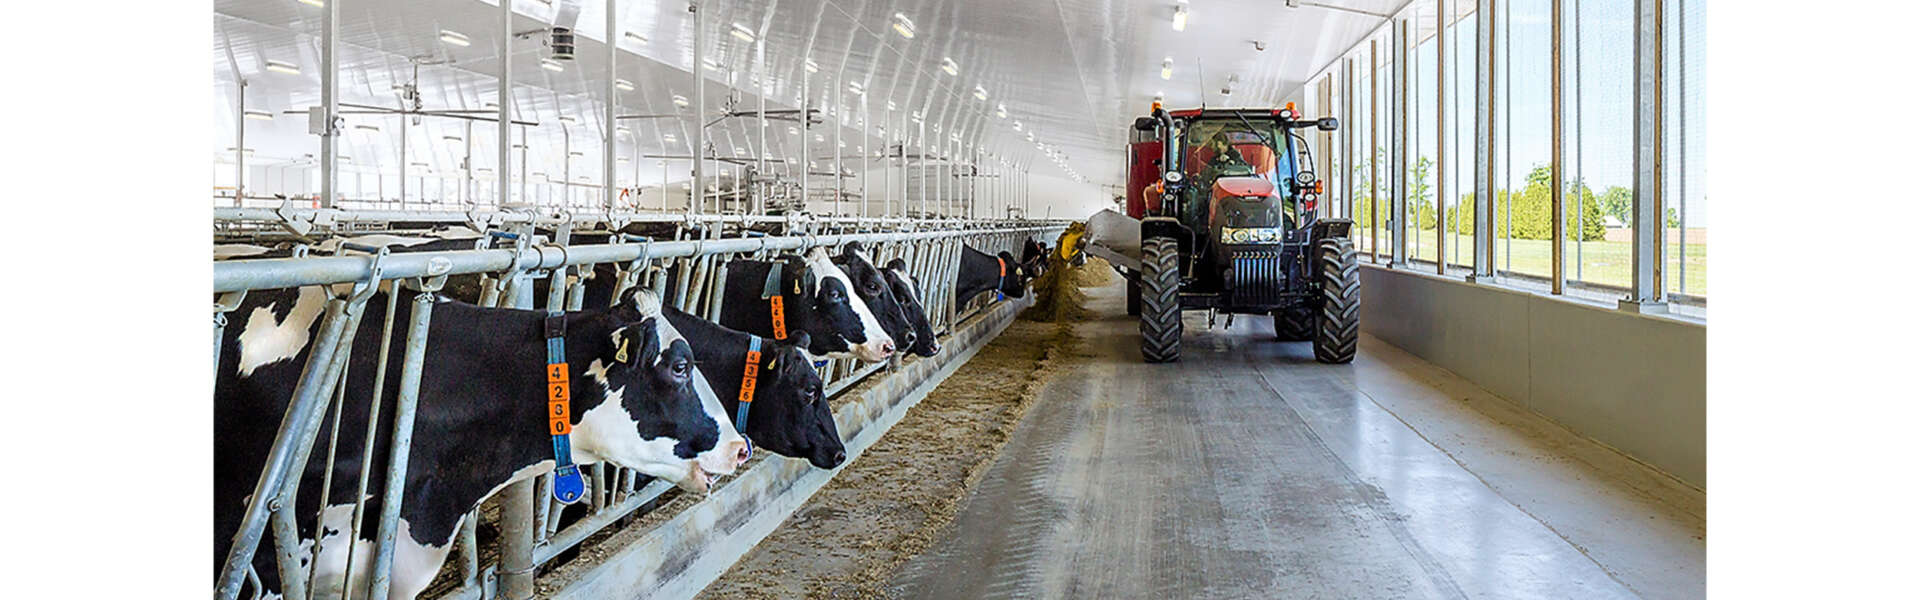 A tractors drops hay for cows in inside a white dairy research centre